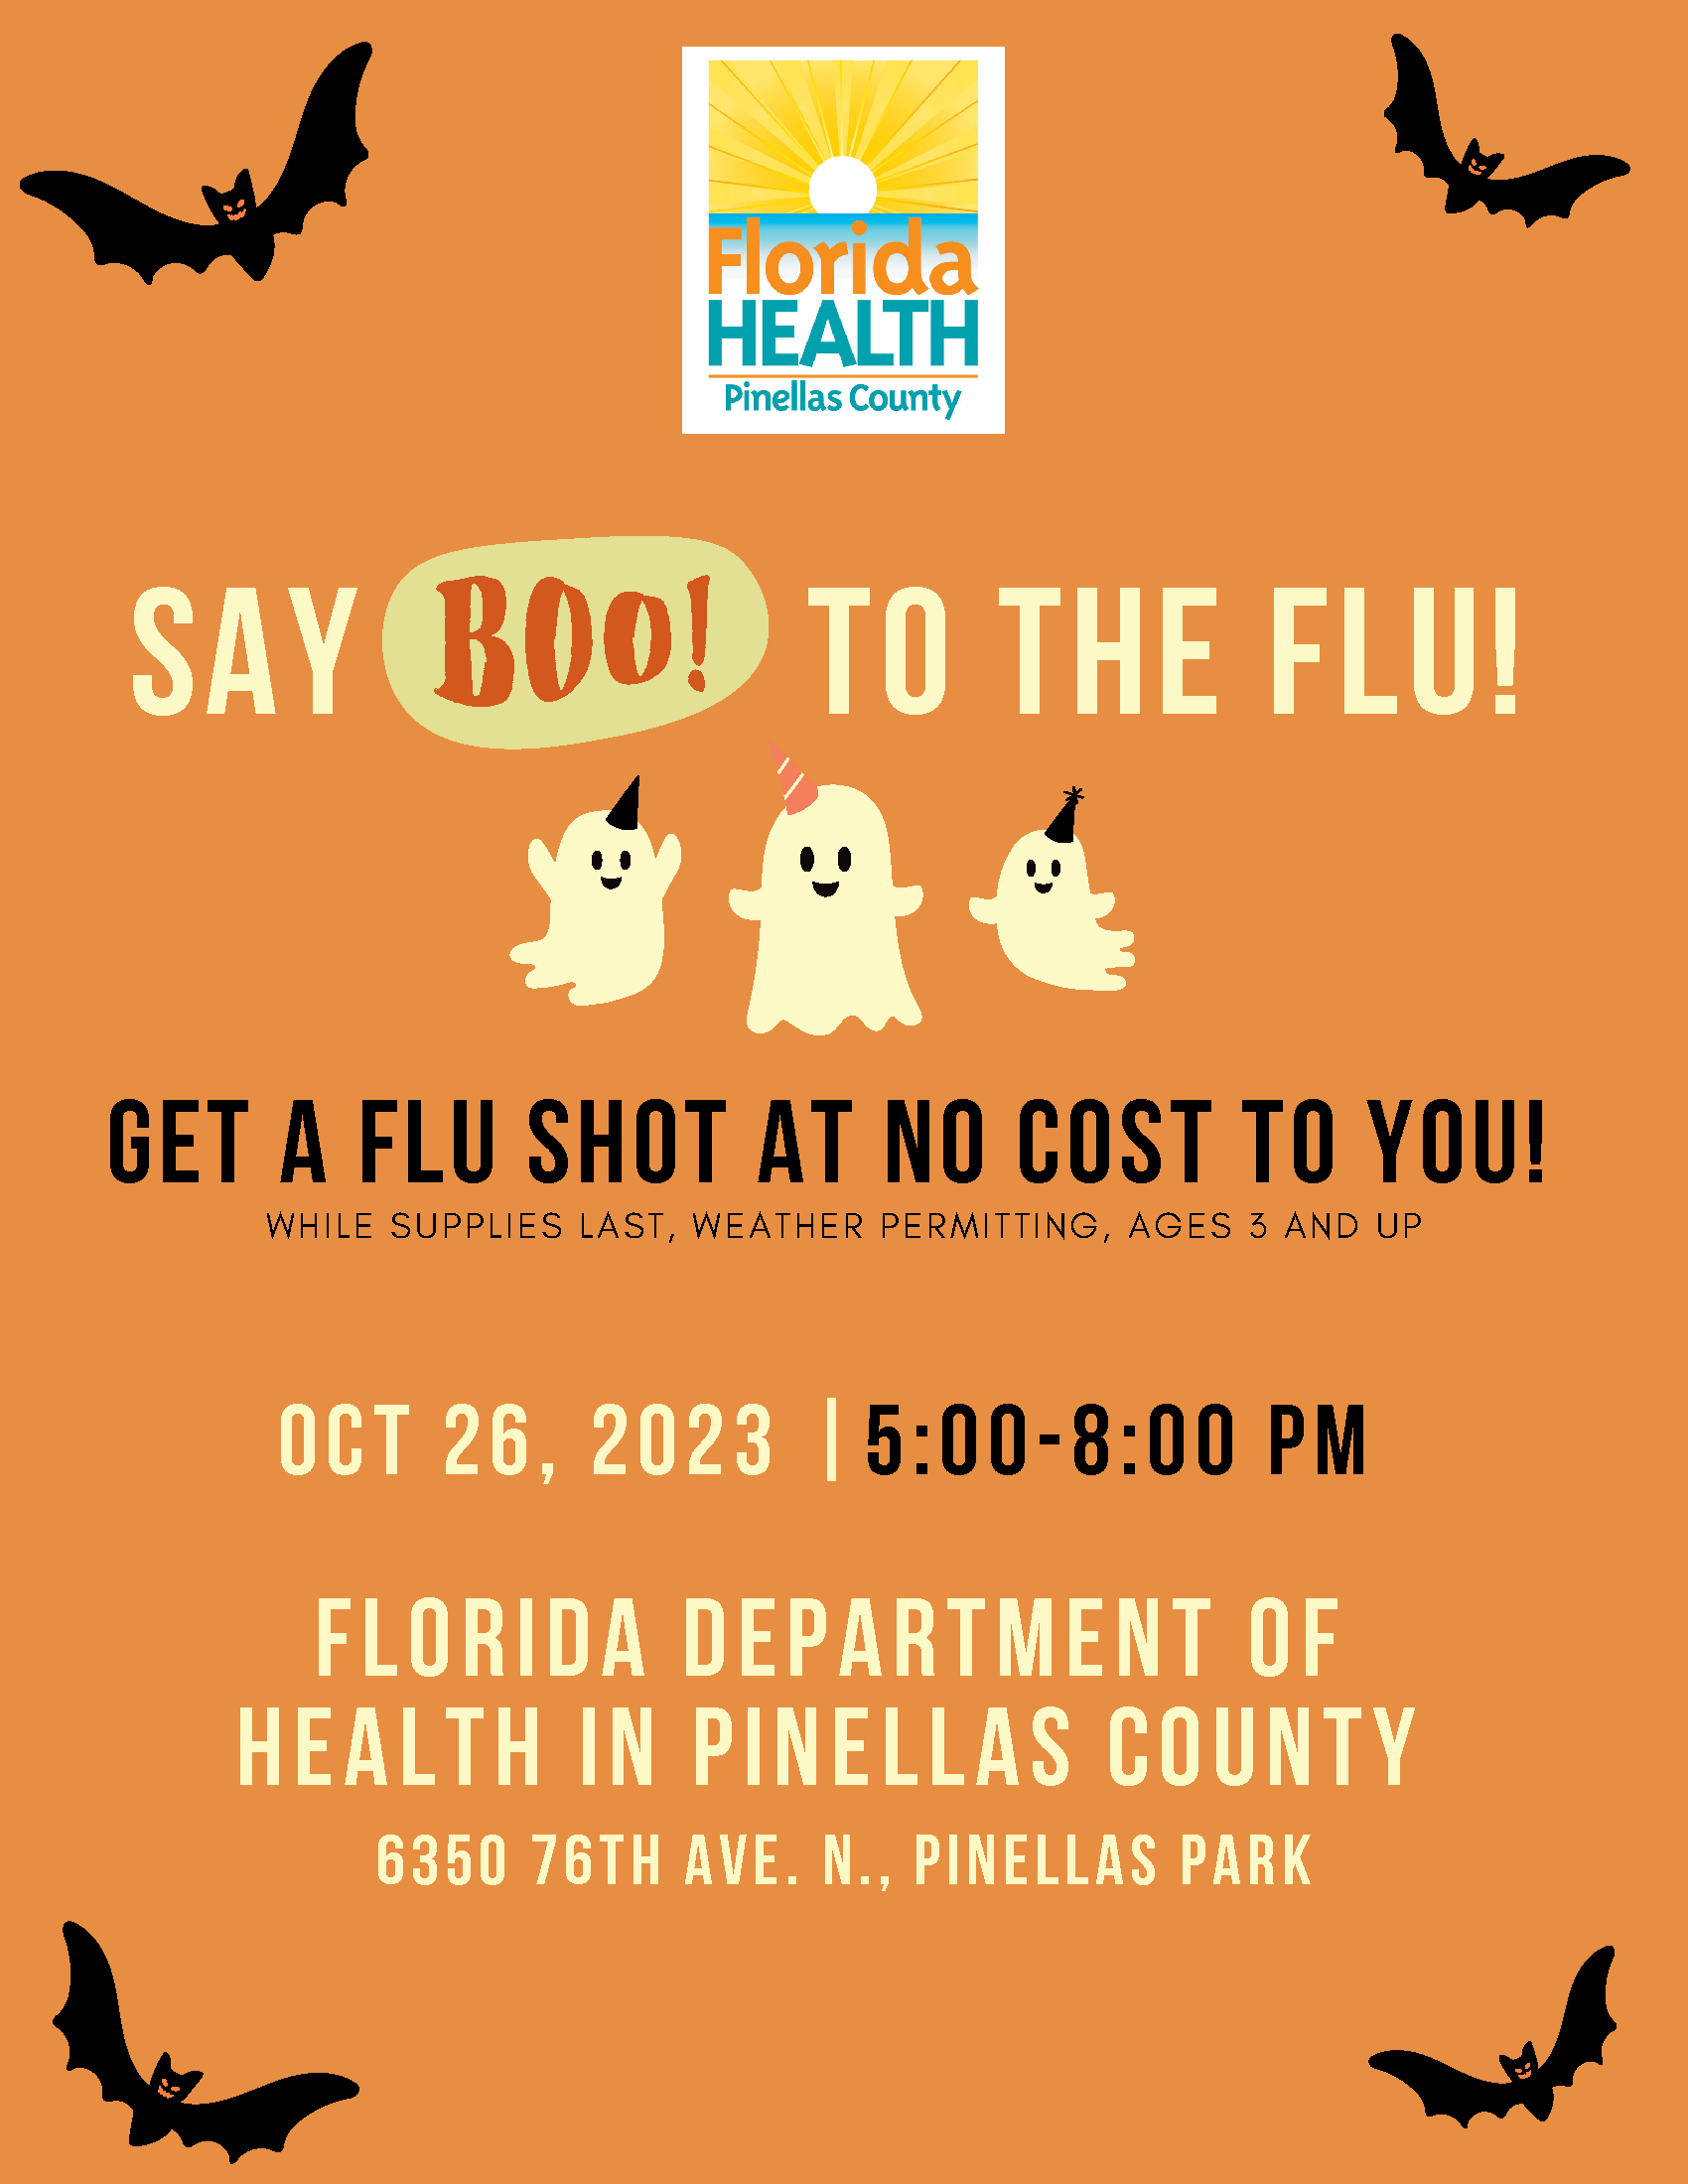 Say Boo! To the Flu! Get a Flu Shot at No Cost to You! October 26th, 2023 from 5:00pm to 8:00pm at 6350 76th Ave. N., Pinellas Park